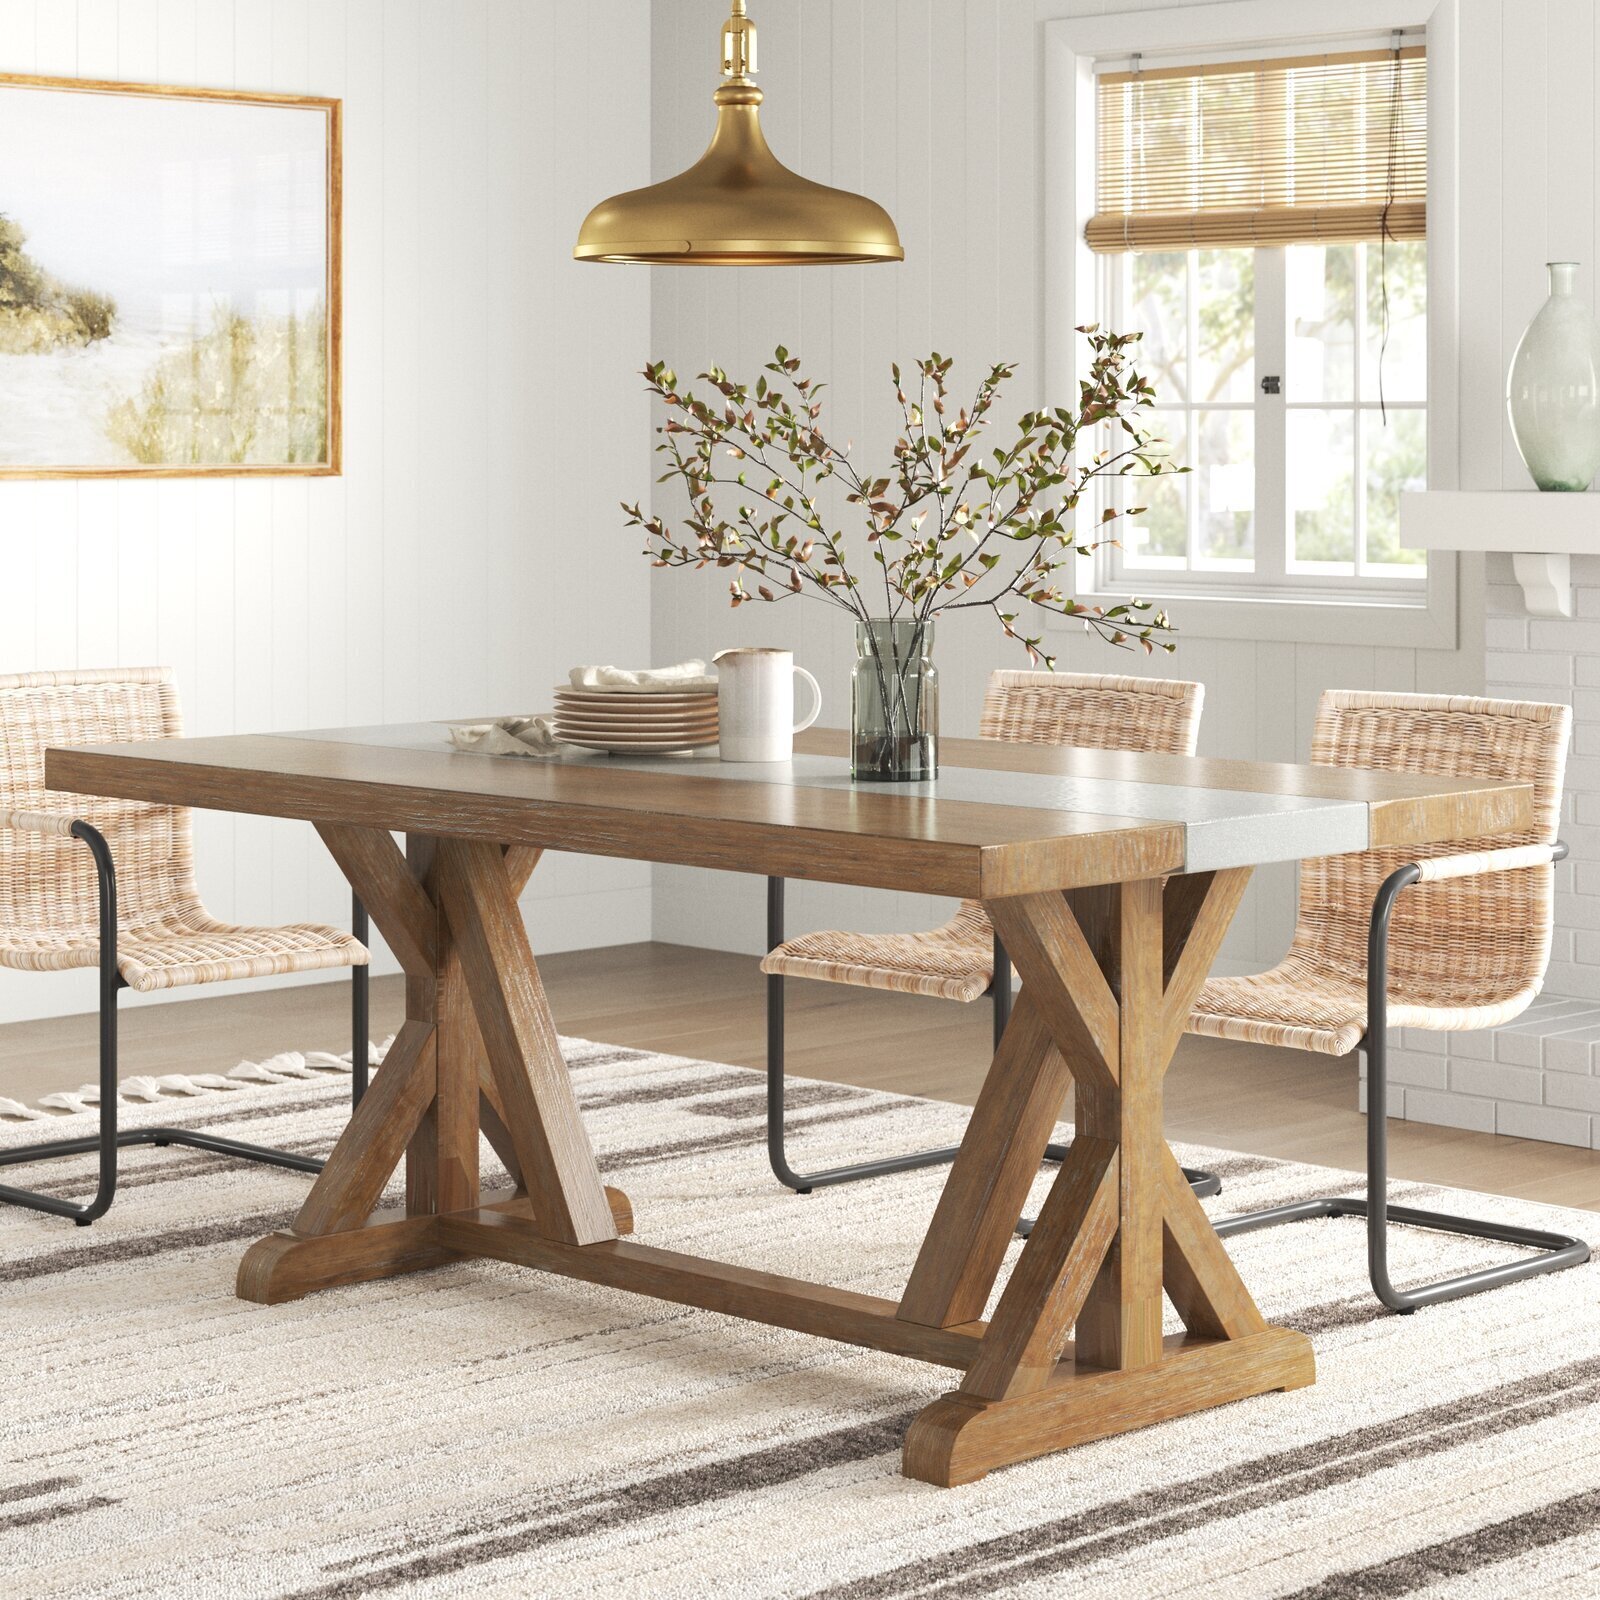 French country table with X shaped legs